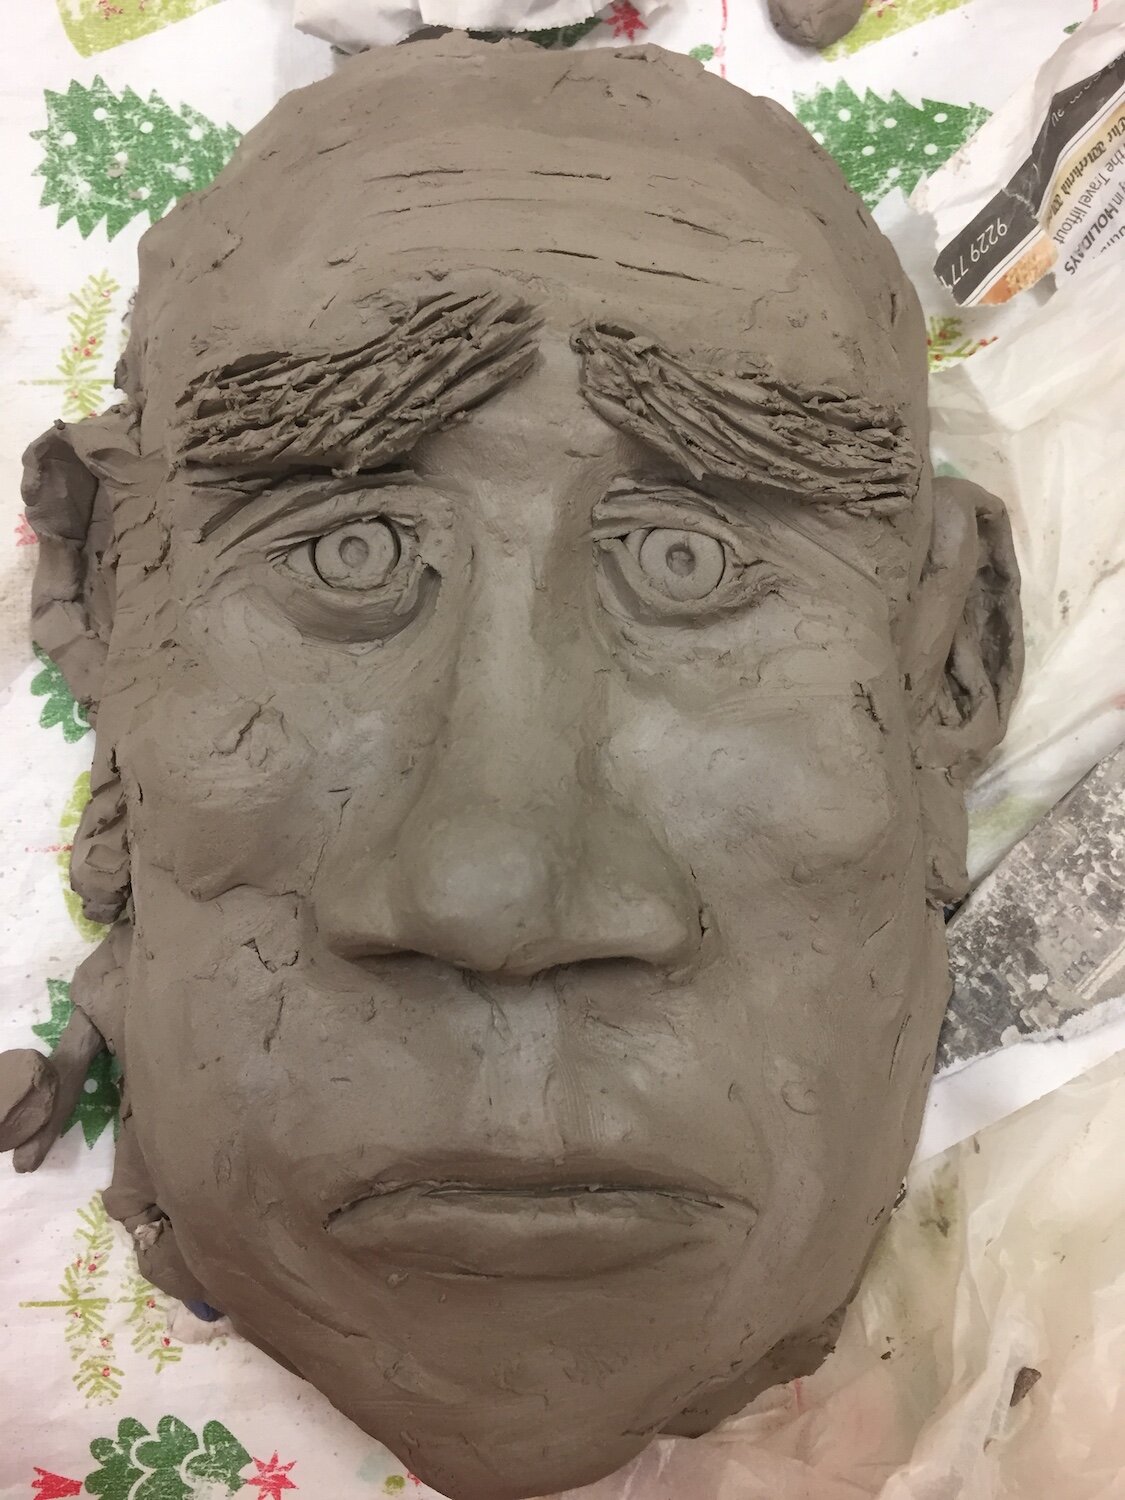 Professional Development Activity Away Day, Perth, Sad Expression of Emotion, Clay Sculpture